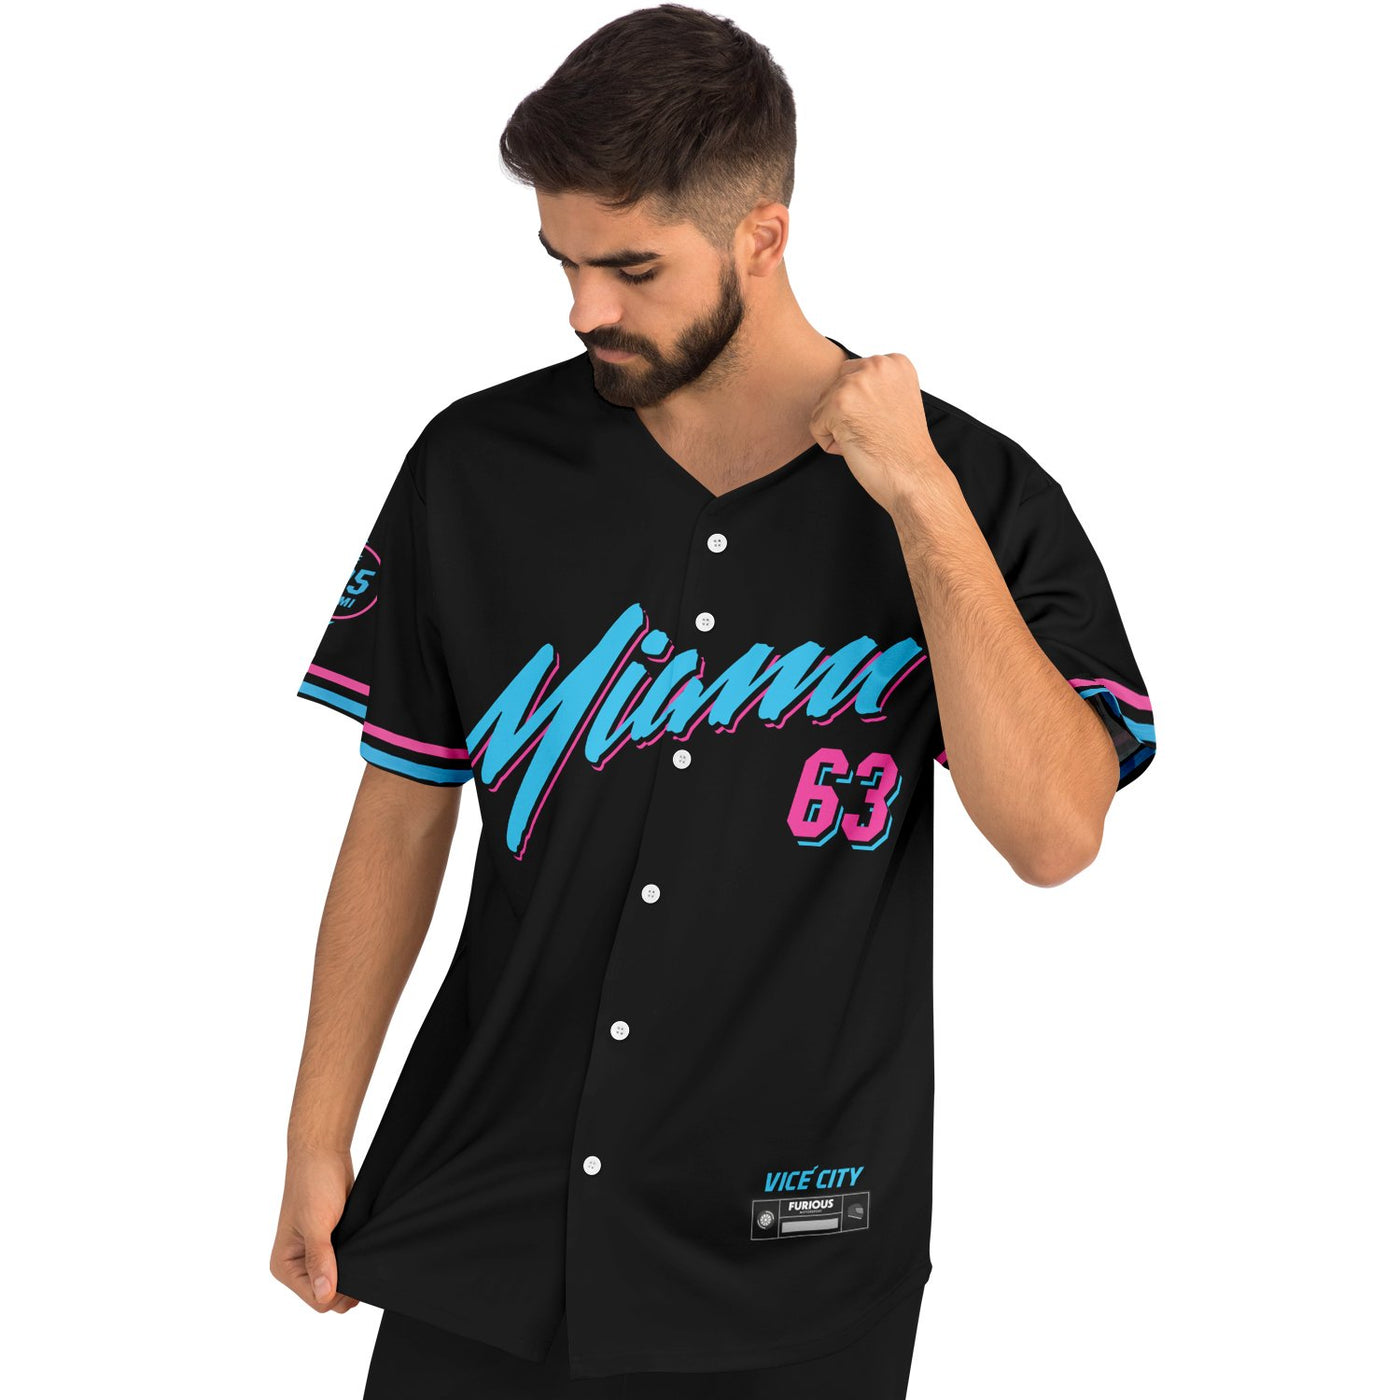 Russell - Vice City Jersey - Furious Motorsport